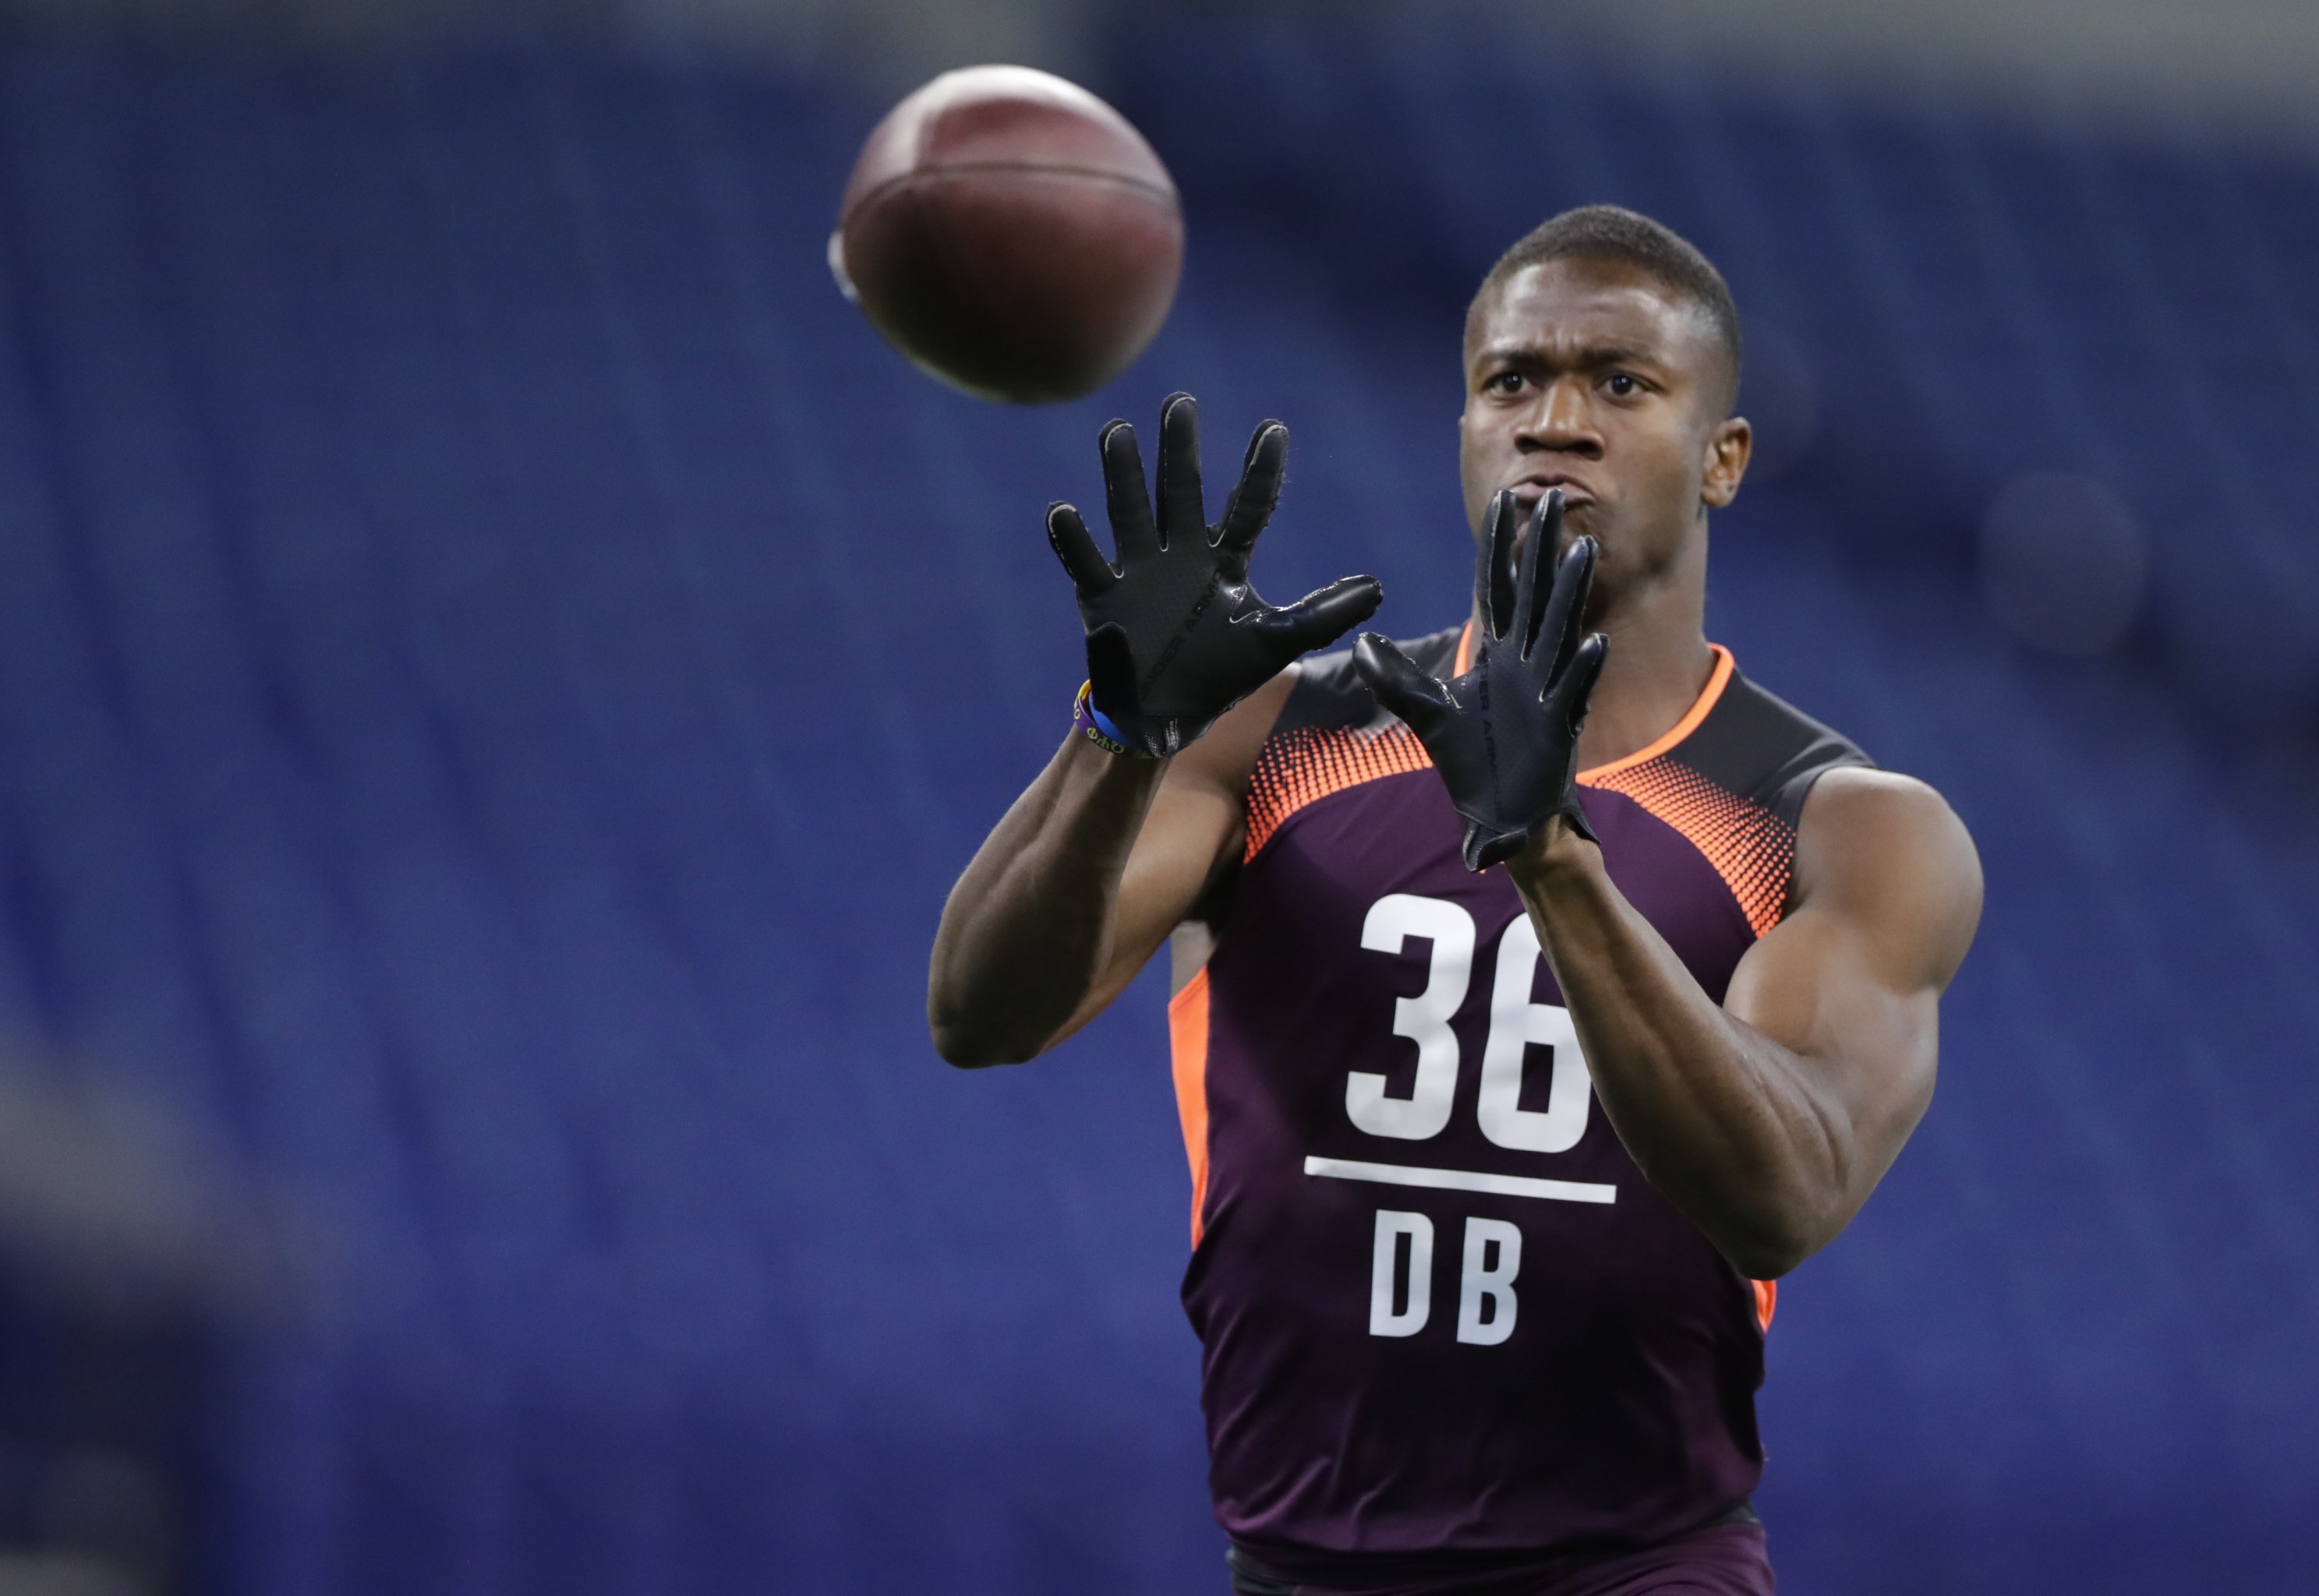 NFL Draft 2019: Picks tracker and live chat - Rounds 2 and 3 - The Phinsider